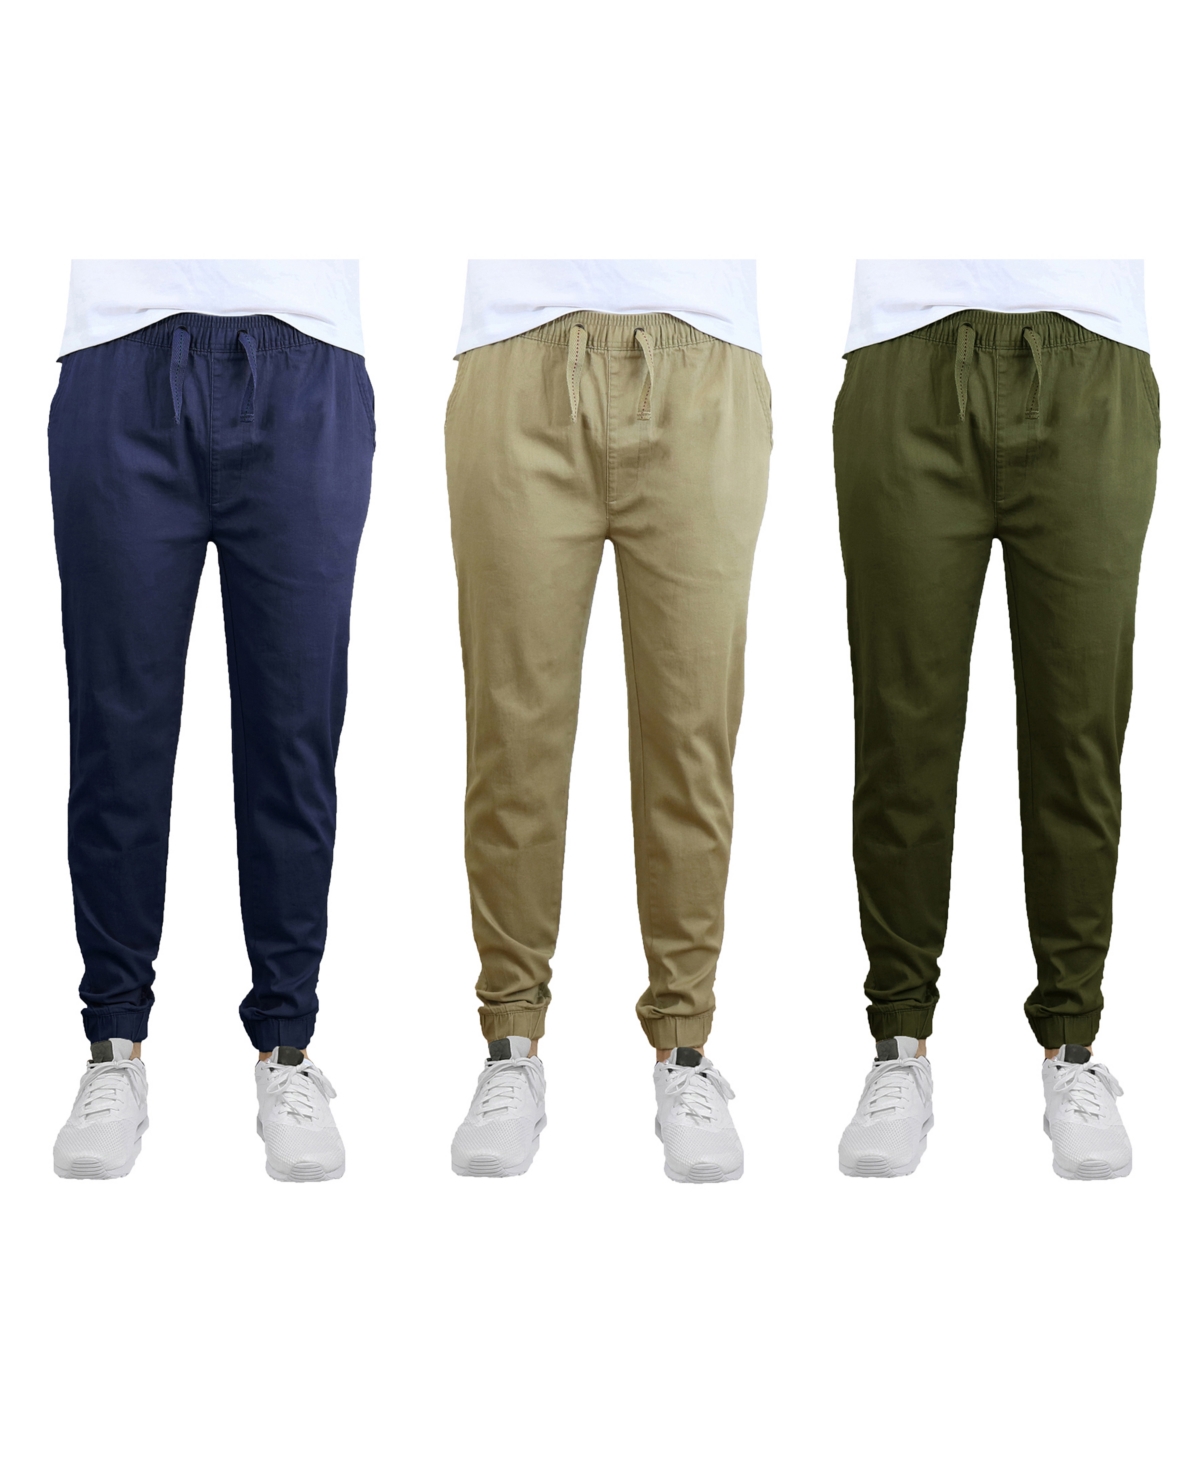 Men's Slim Fit Basic Stretch Twill Joggers, Pack of 3 - Black, Khaki and Navy